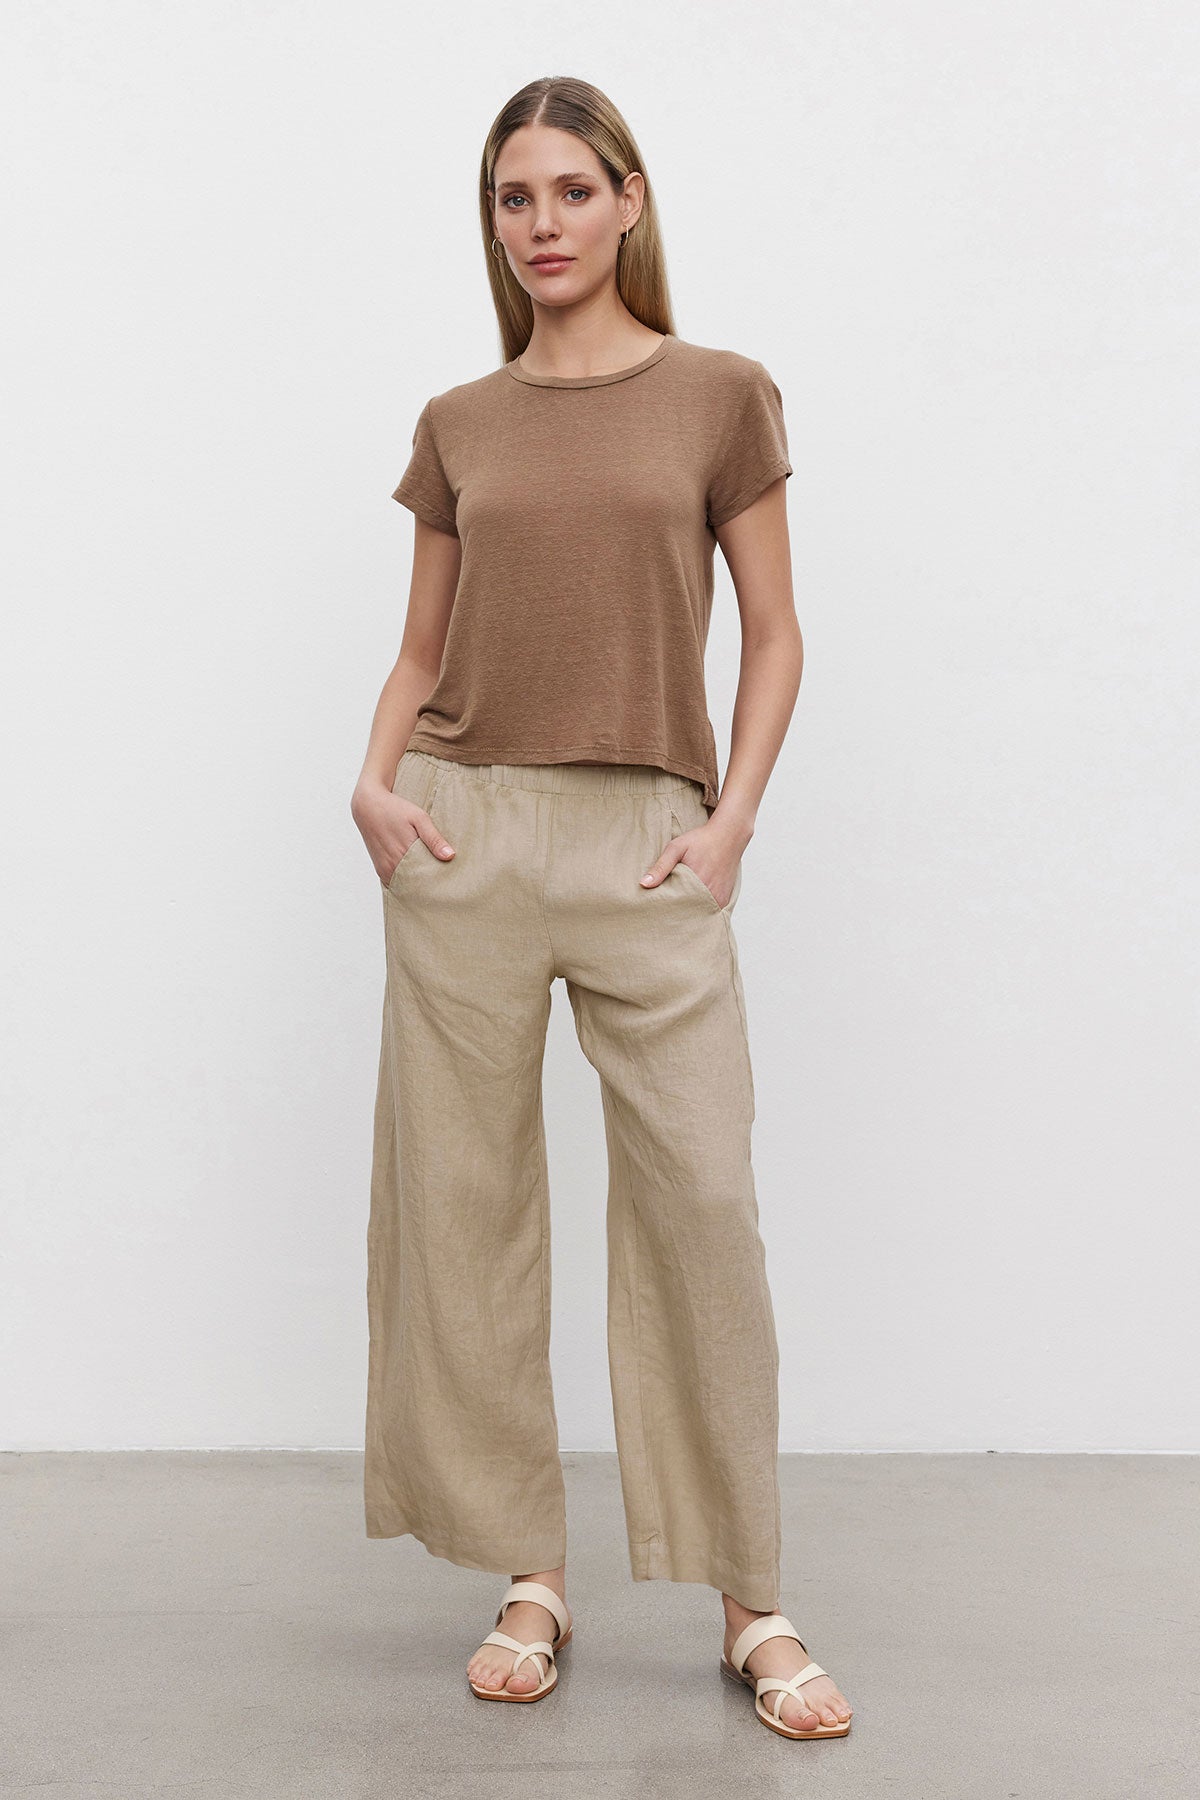   A woman stands in a neutral pose wearing a brown t-shirt, Velvet by Graham & Spencer LOLA LINEN PANTS with an elastic waist, and white sandals against a plain backdrop. 